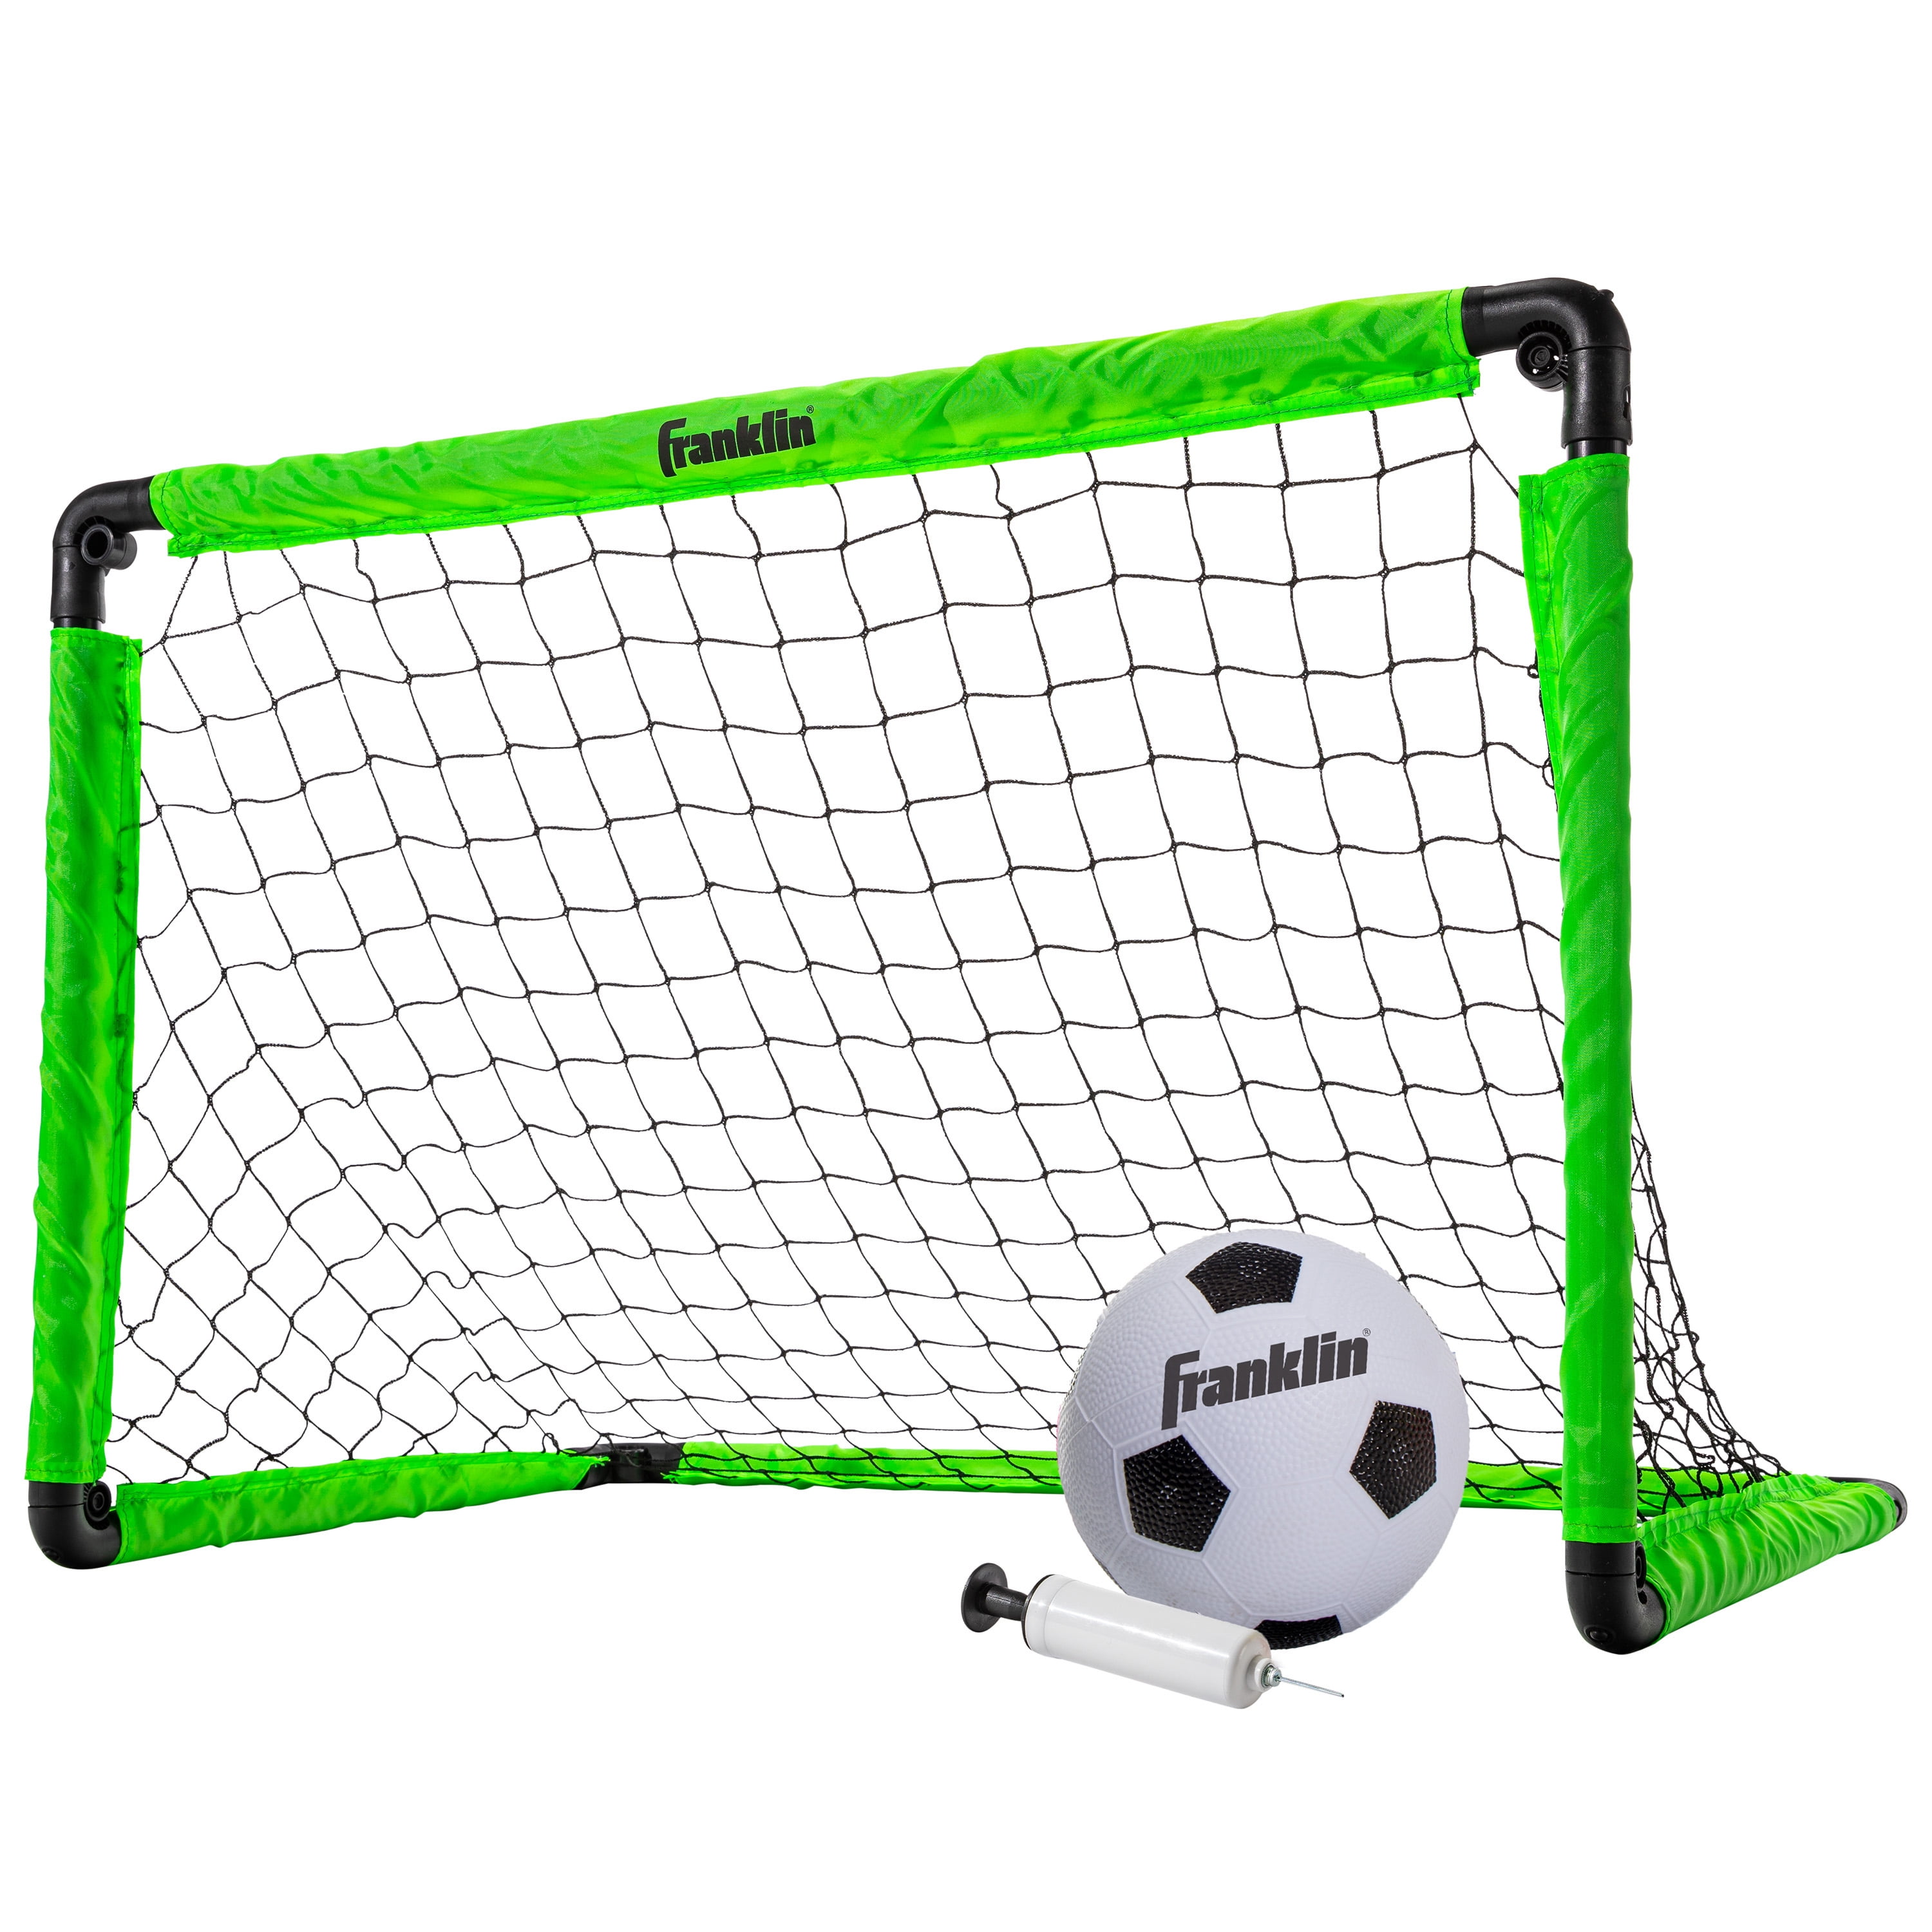 Soccer Gear For Boys Youth And Adult Game Play Black Hawk Portable Football Goal 